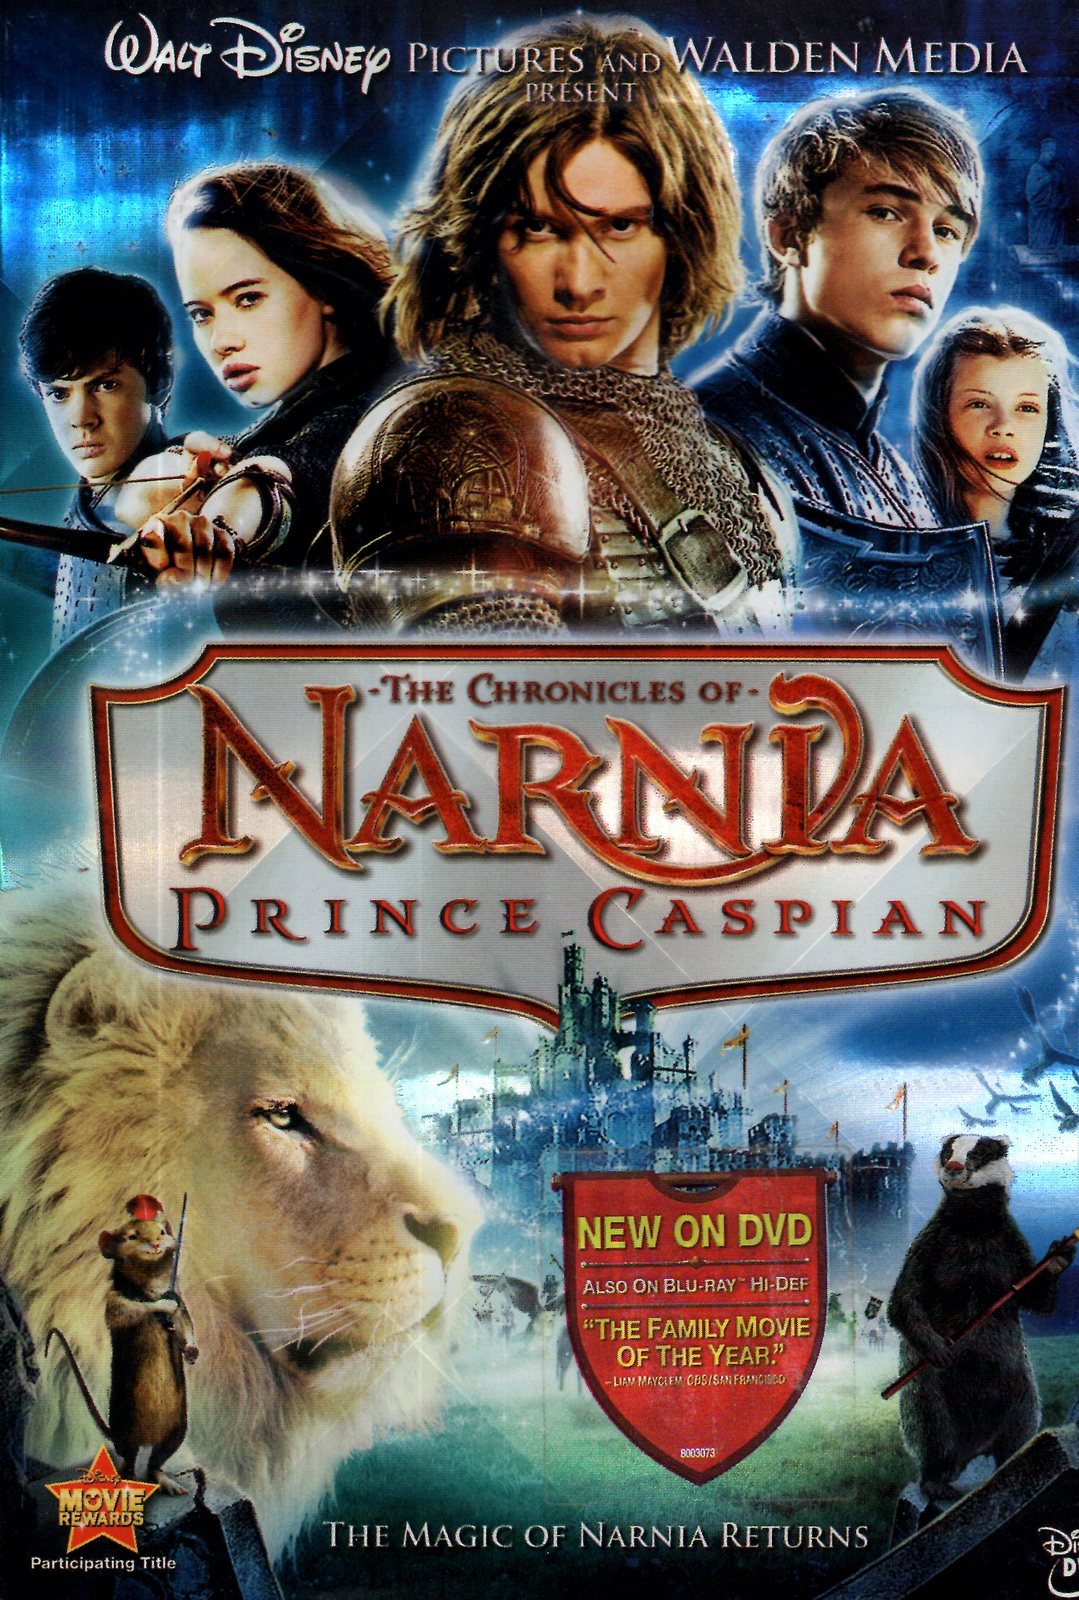 Primary image for Walt Disney "The Chronicles of Narnia Prince Caspian - DVD